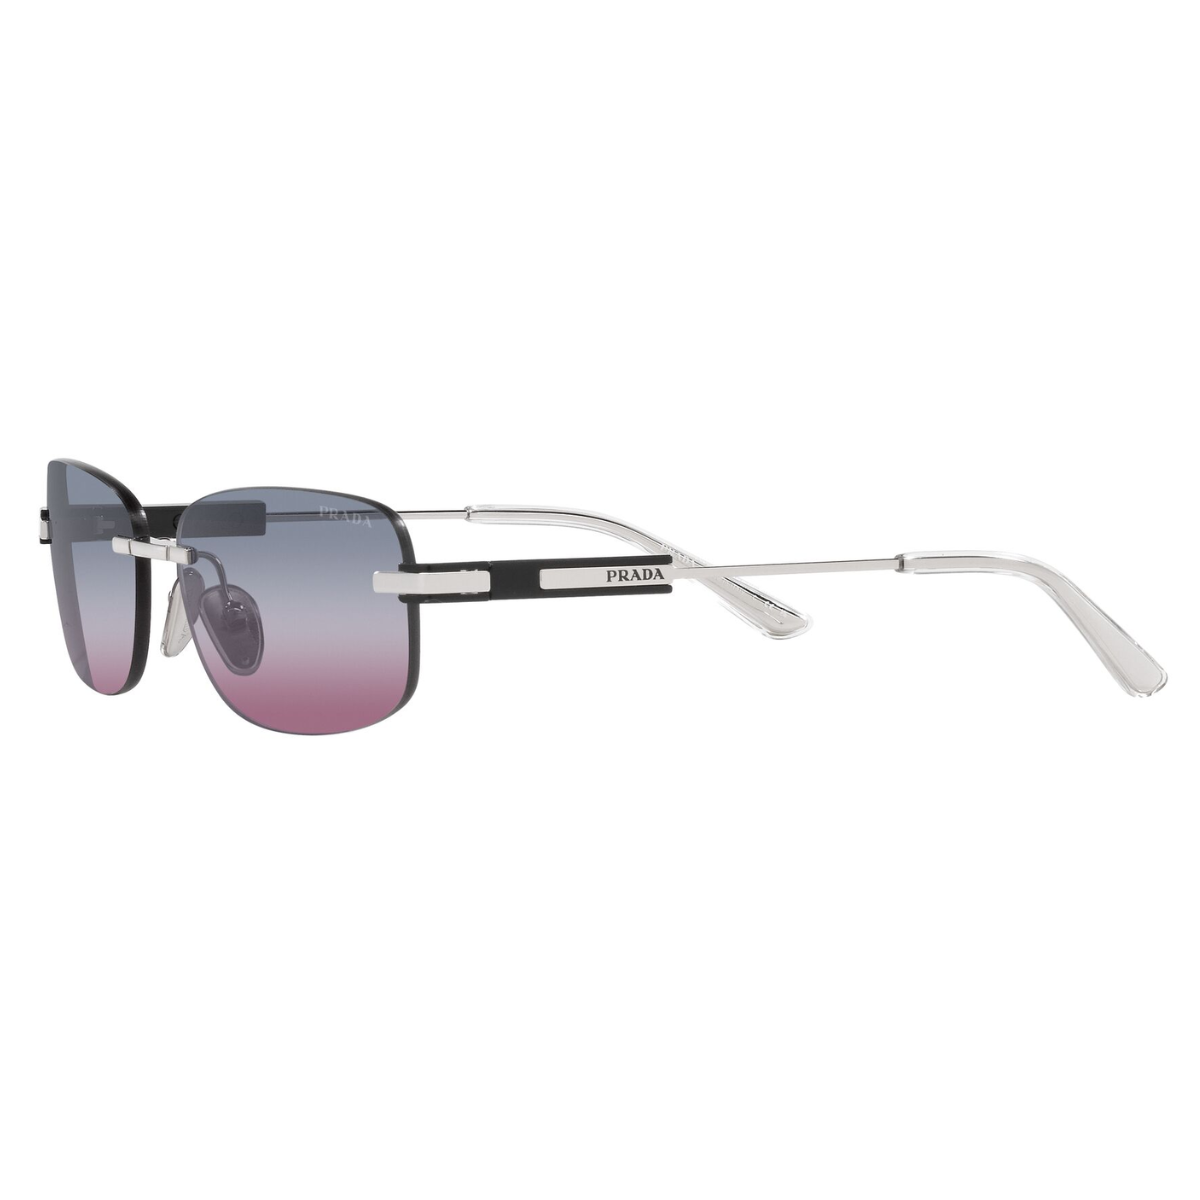 "Upgrade your eyewear with Prada SPR 68ZS 1BC08B sunglasses from Optorium. These aviator-style shades cater to both men and women, perfect for all occasions."